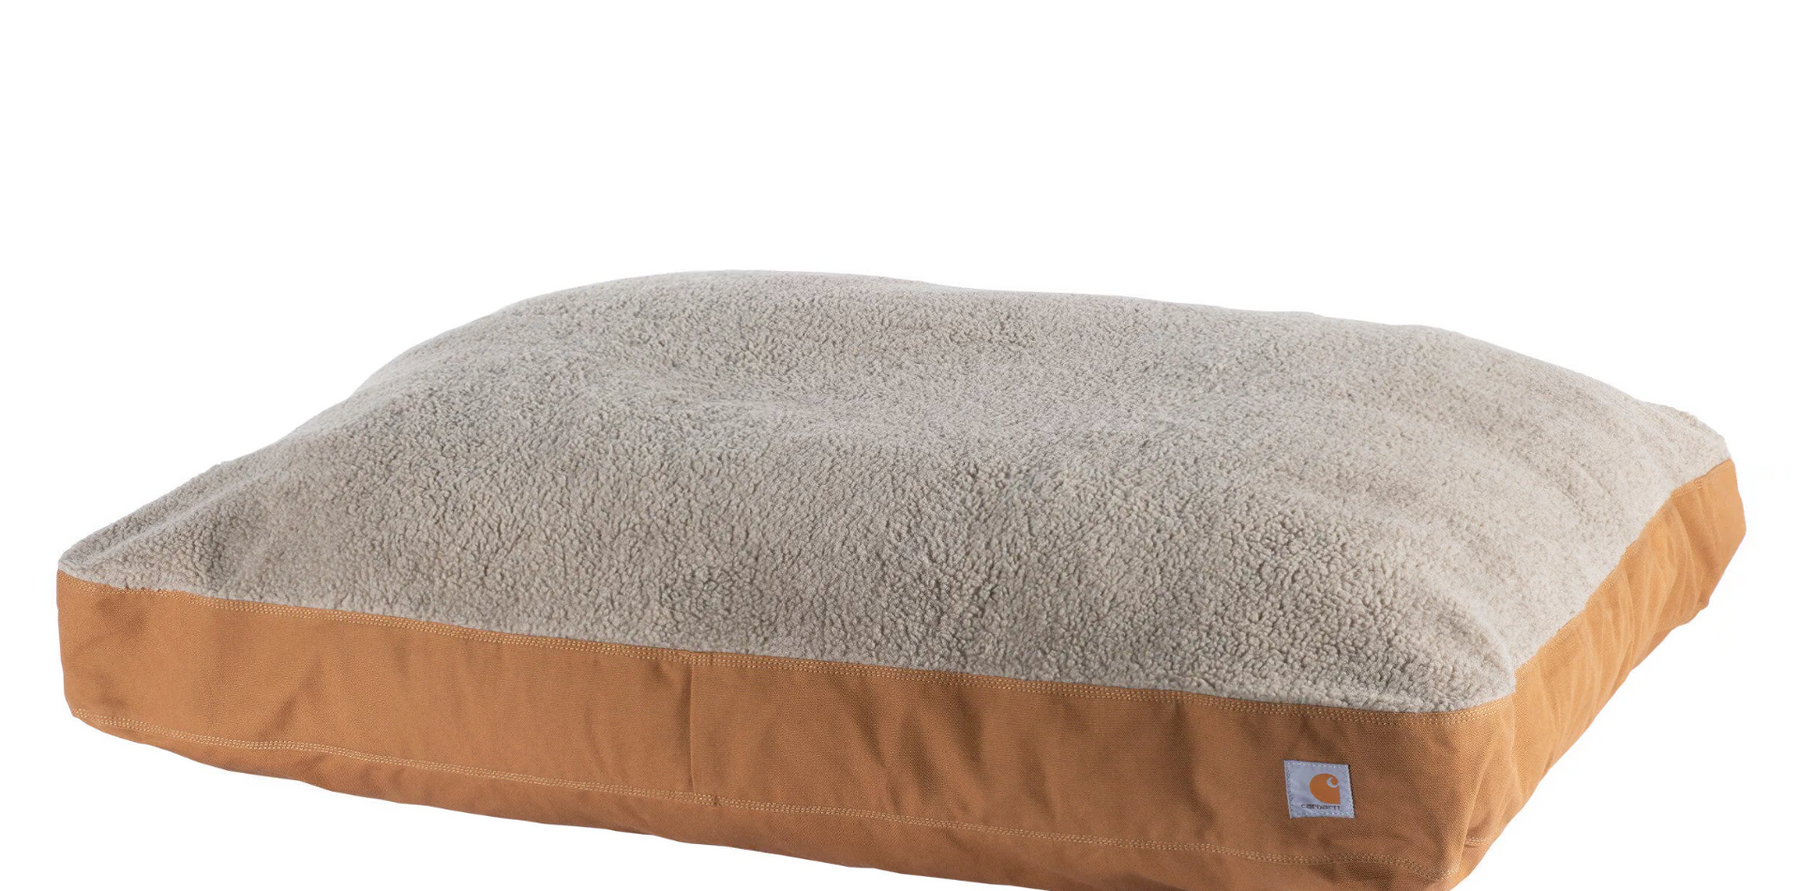 Carhartt Sherpa Top Dog Bed Large